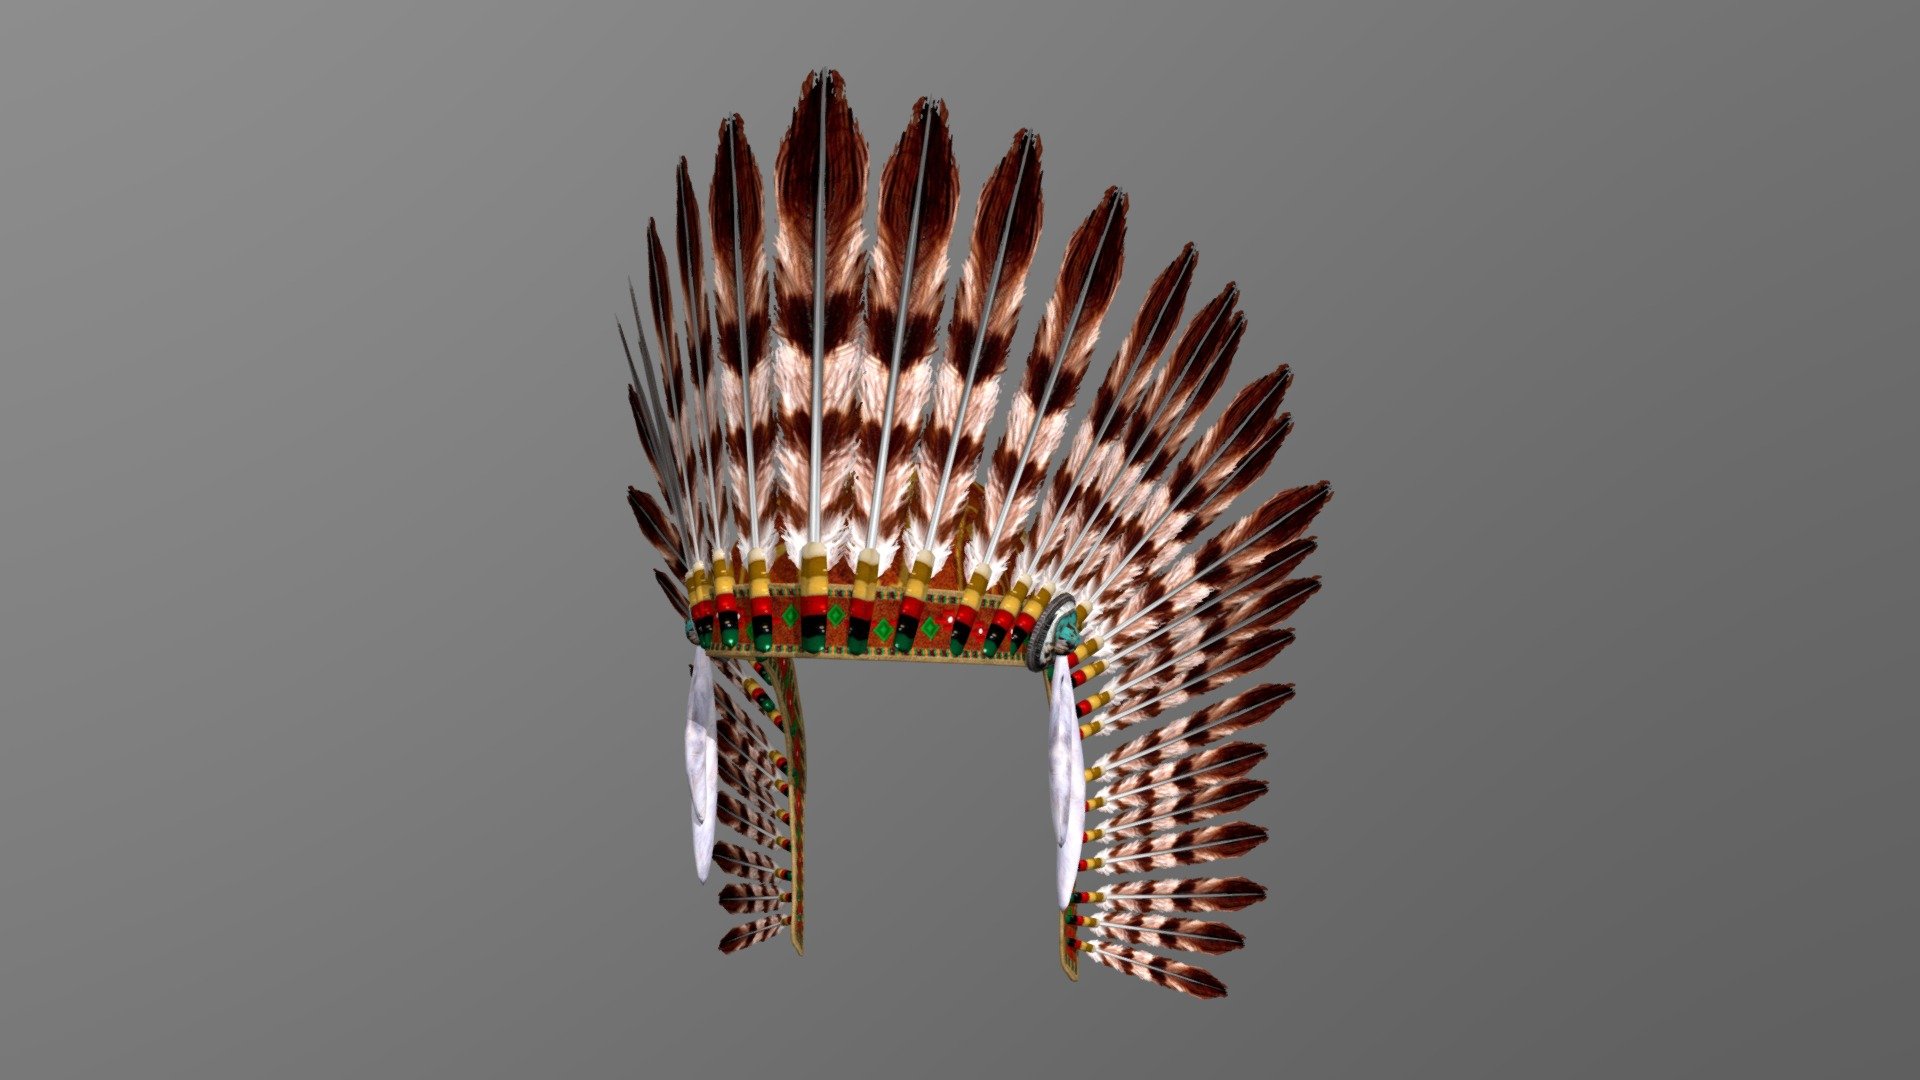 War bonnets (also called warbonnets or headdresses) are feathered headgear traditionally worn by male leaders of the American Plains Indians Nations who have earned a place of great respect in their tribe. Originally they were sometimes worn into battle, but they are now primarily used for ceremonial occasions. In the Native American and First Nations communities that traditionally have these items of regalia, they are seen as items of great spiritual and political importance, only to be worn by those who have earned the right and honour through formal recognition by their people.

*1 mesh (medium poly) with textures and materials 3d model